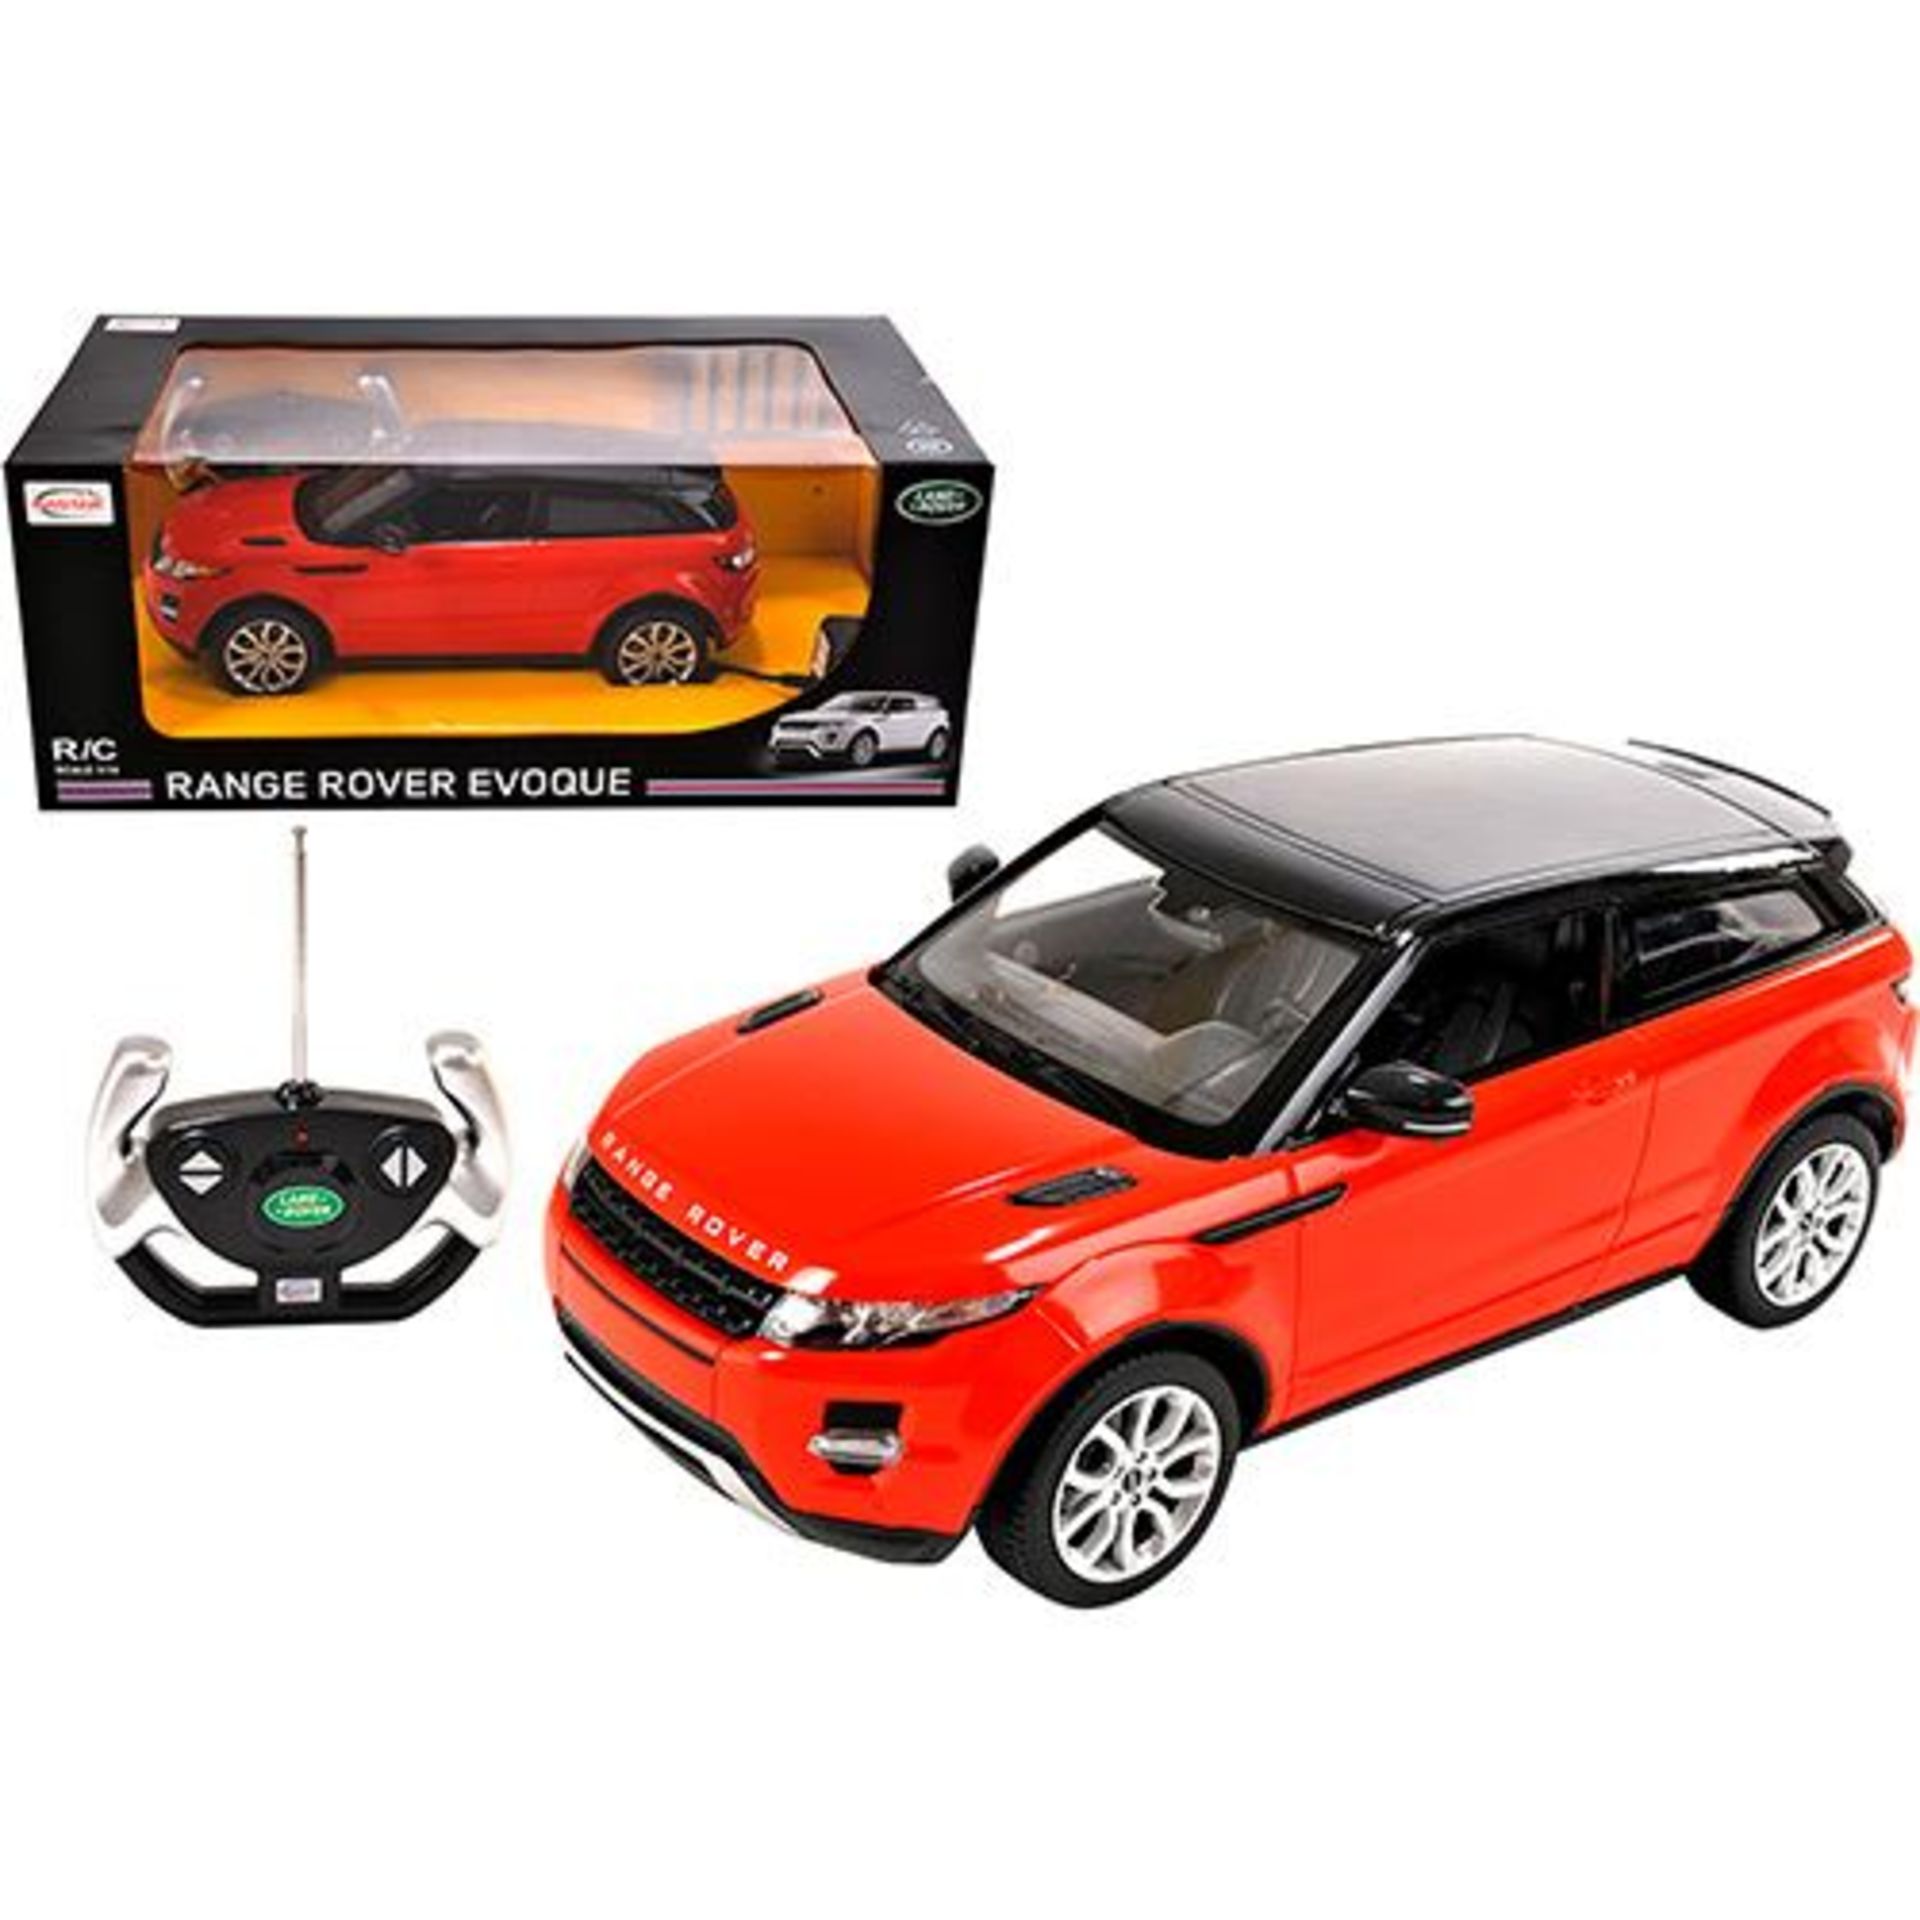 V *TRADE QTY* Brand New 1:14 Scale R/C Range Rover Evoque SRP49.99 Various Colours X 7 YOUR BID - Image 2 of 2